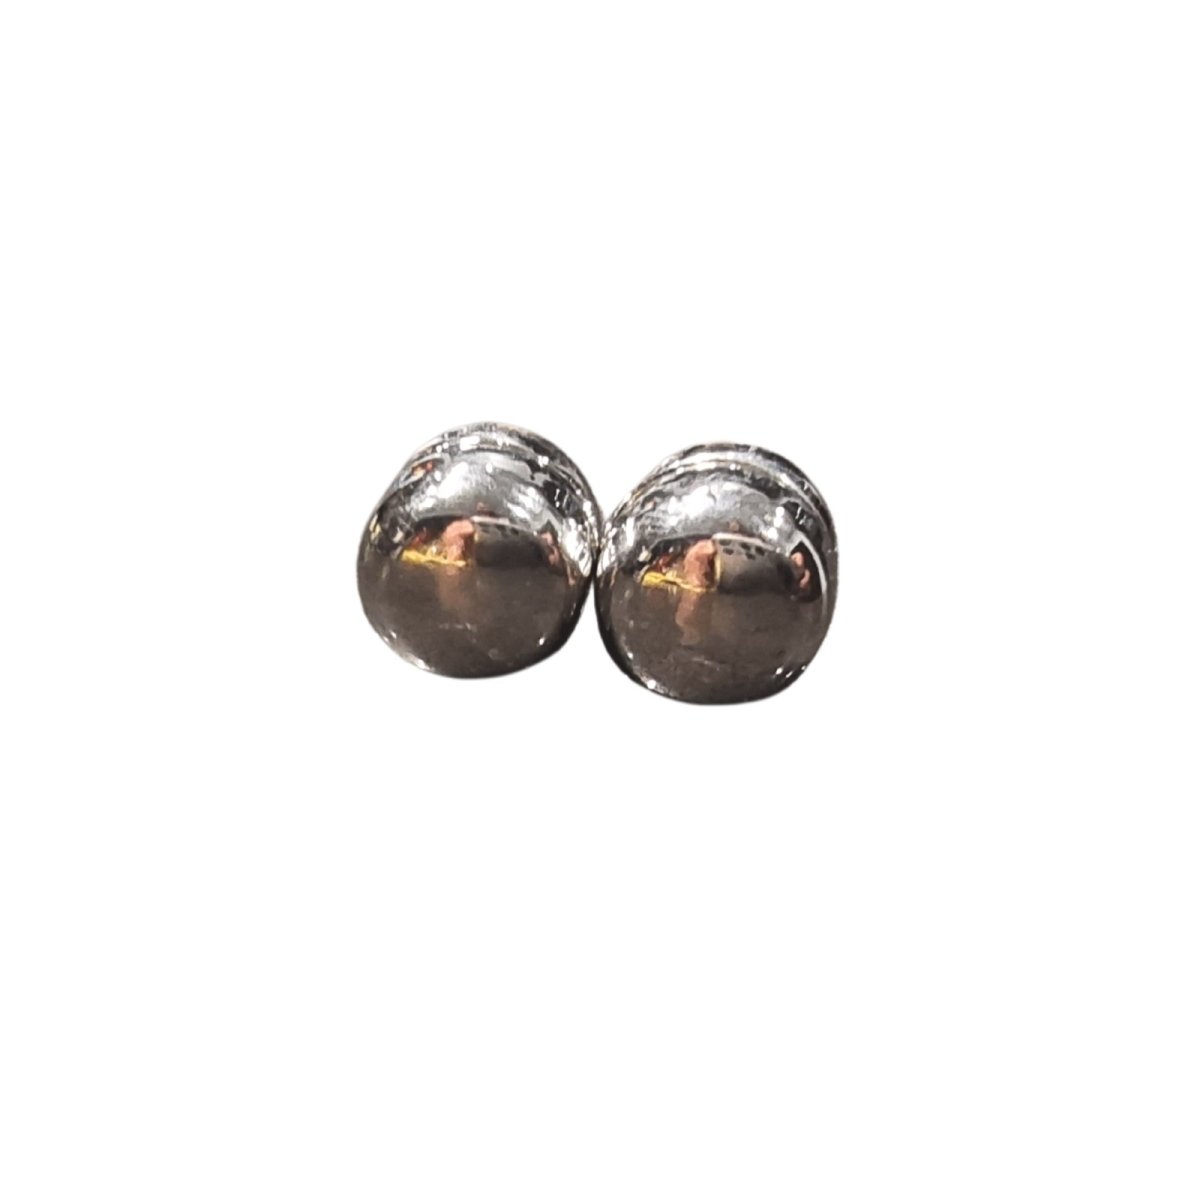 2 Pairs Magnetic Hijab Metallic Pins - Silver - Divinity Collection